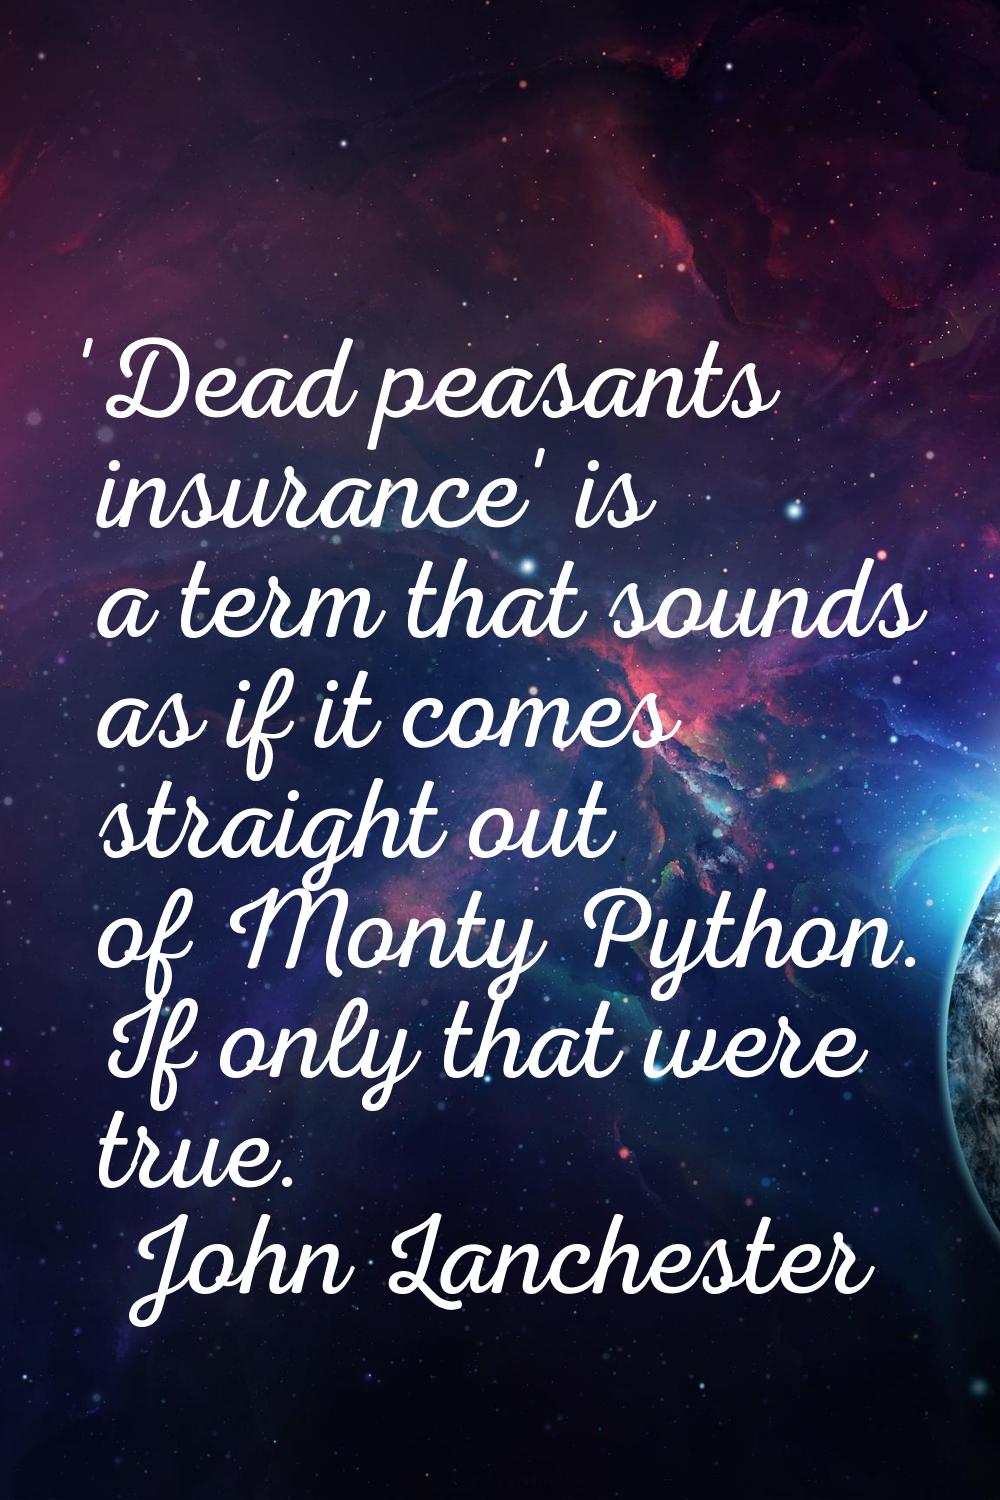 'Dead peasants insurance' is a term that sounds as if it comes straight out of Monty Python. If onl